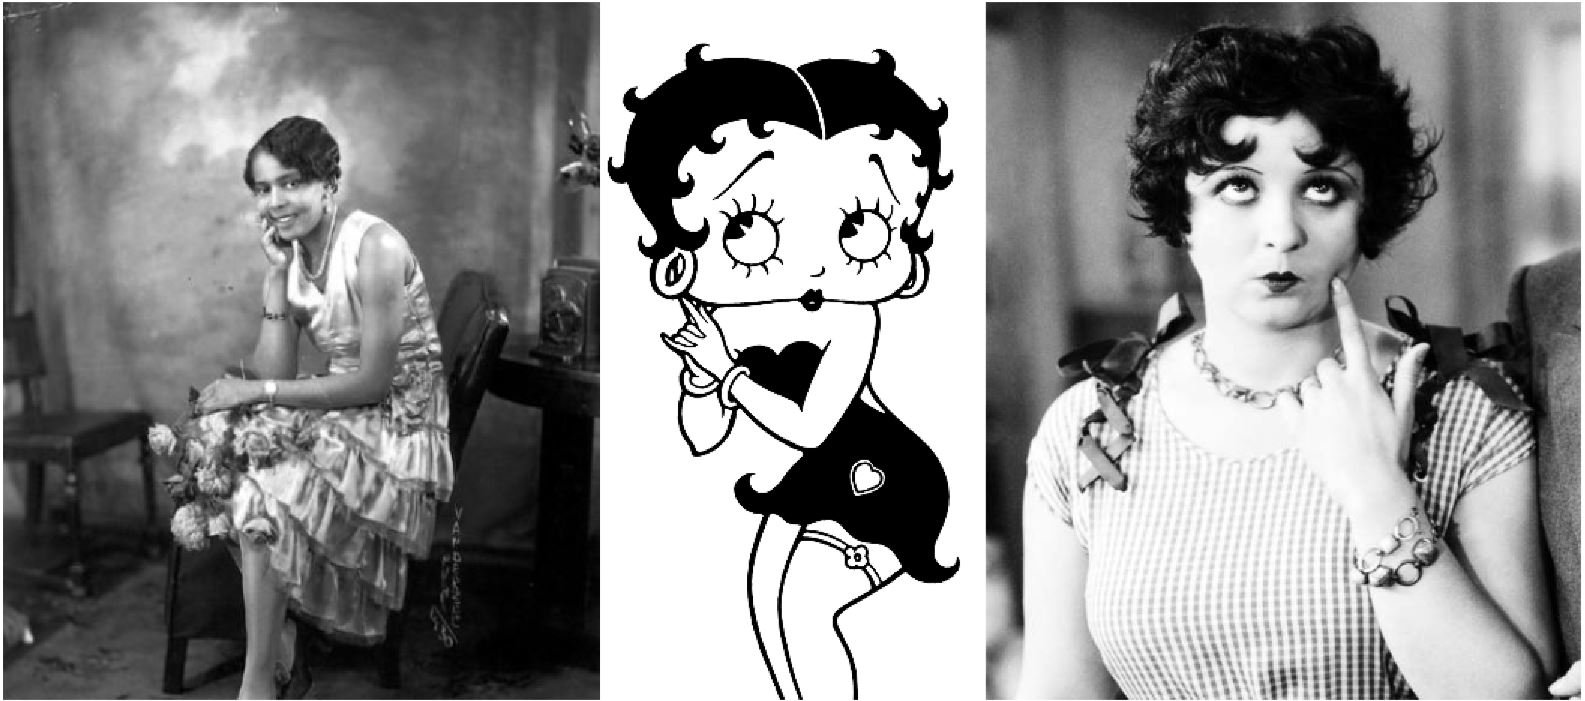 Betty Boop Having Sex - Free Sex, Free Beer, Free Speech â€“ Mr. Boop and the Problem of Desire -  SOLRAD